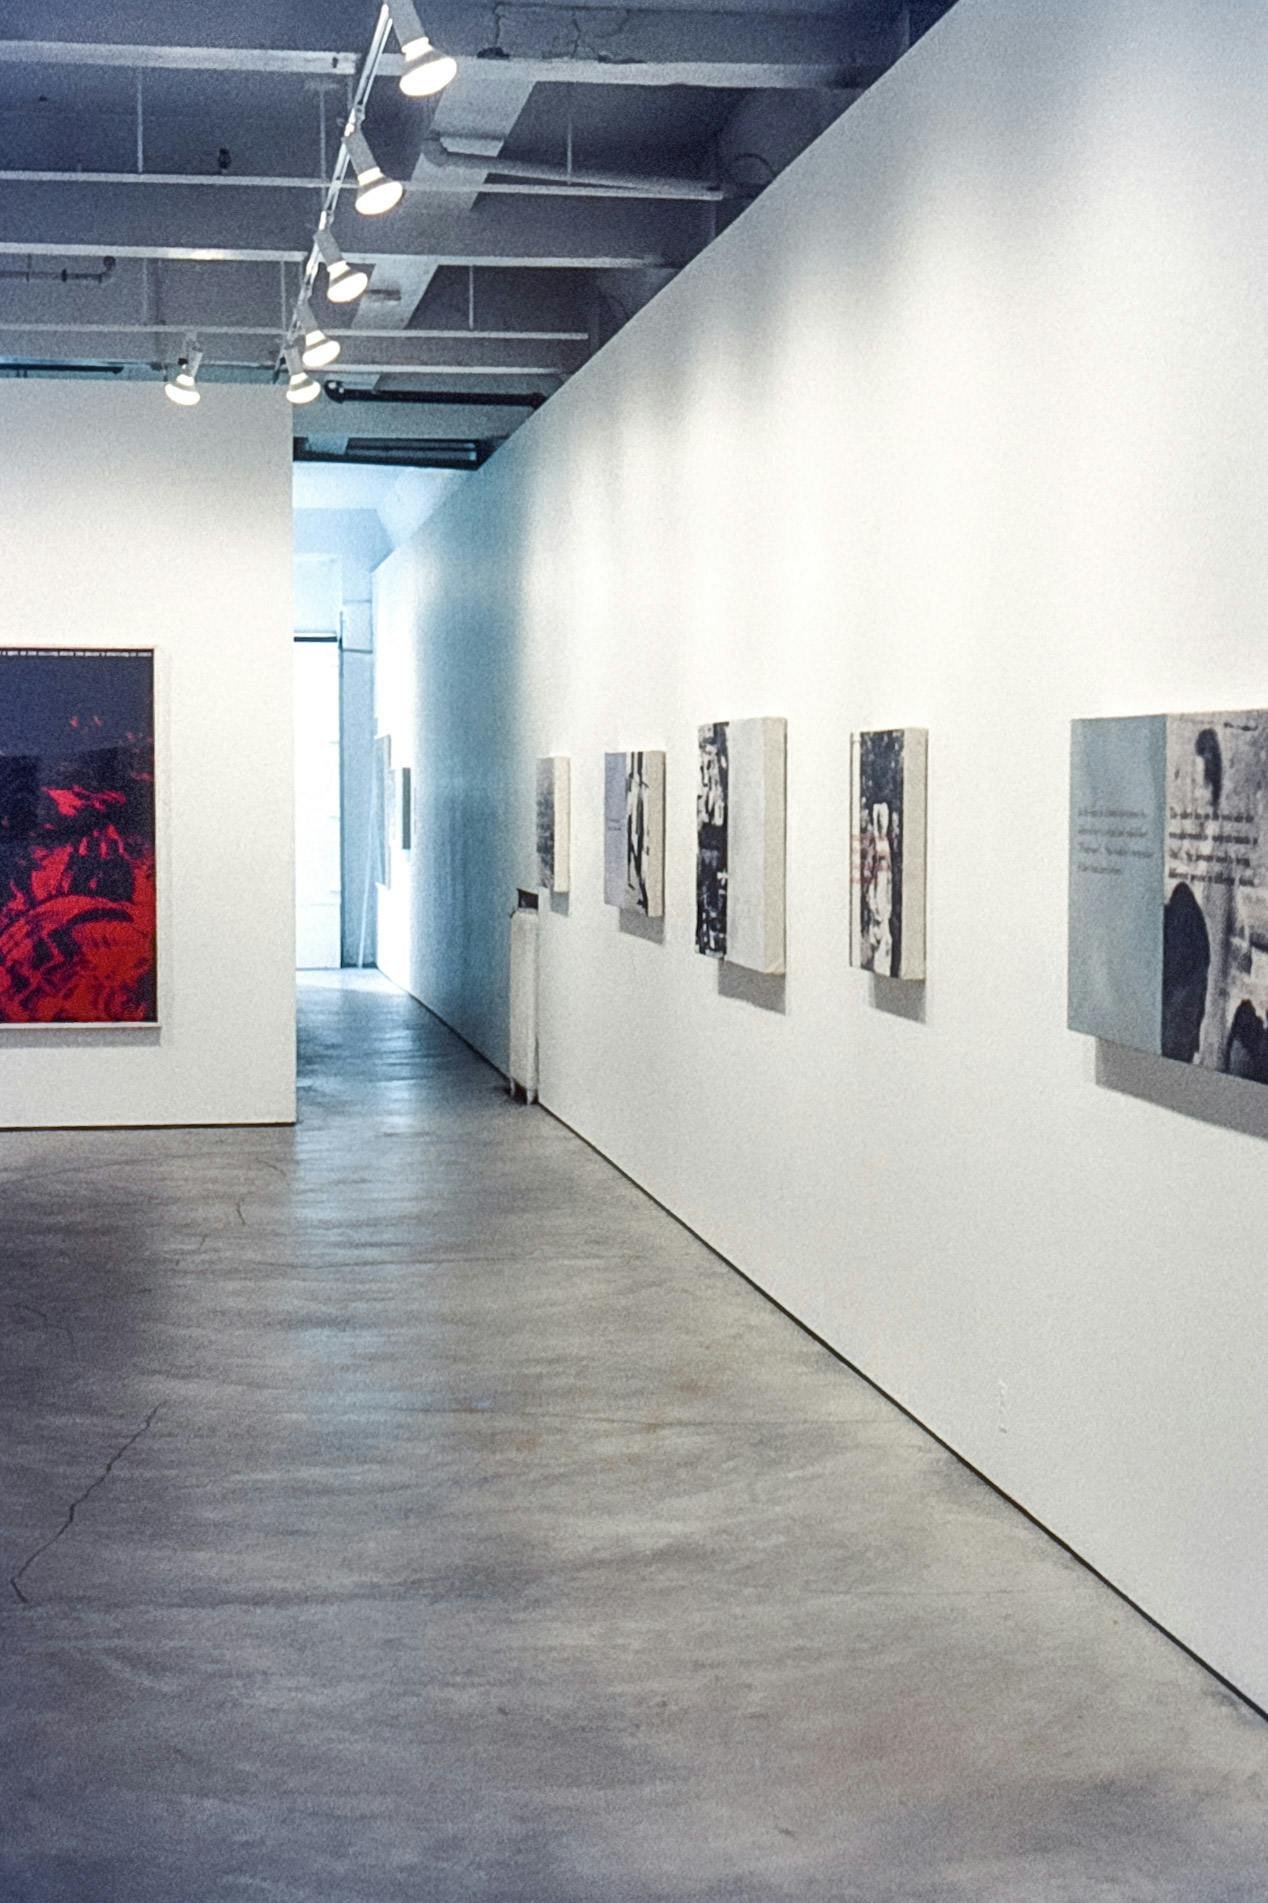 A photo of the installation view in the gallery. All of the five artworks mounted on the right-hand wall have black and white photographs accompanied by texts written beside or over the photographs.